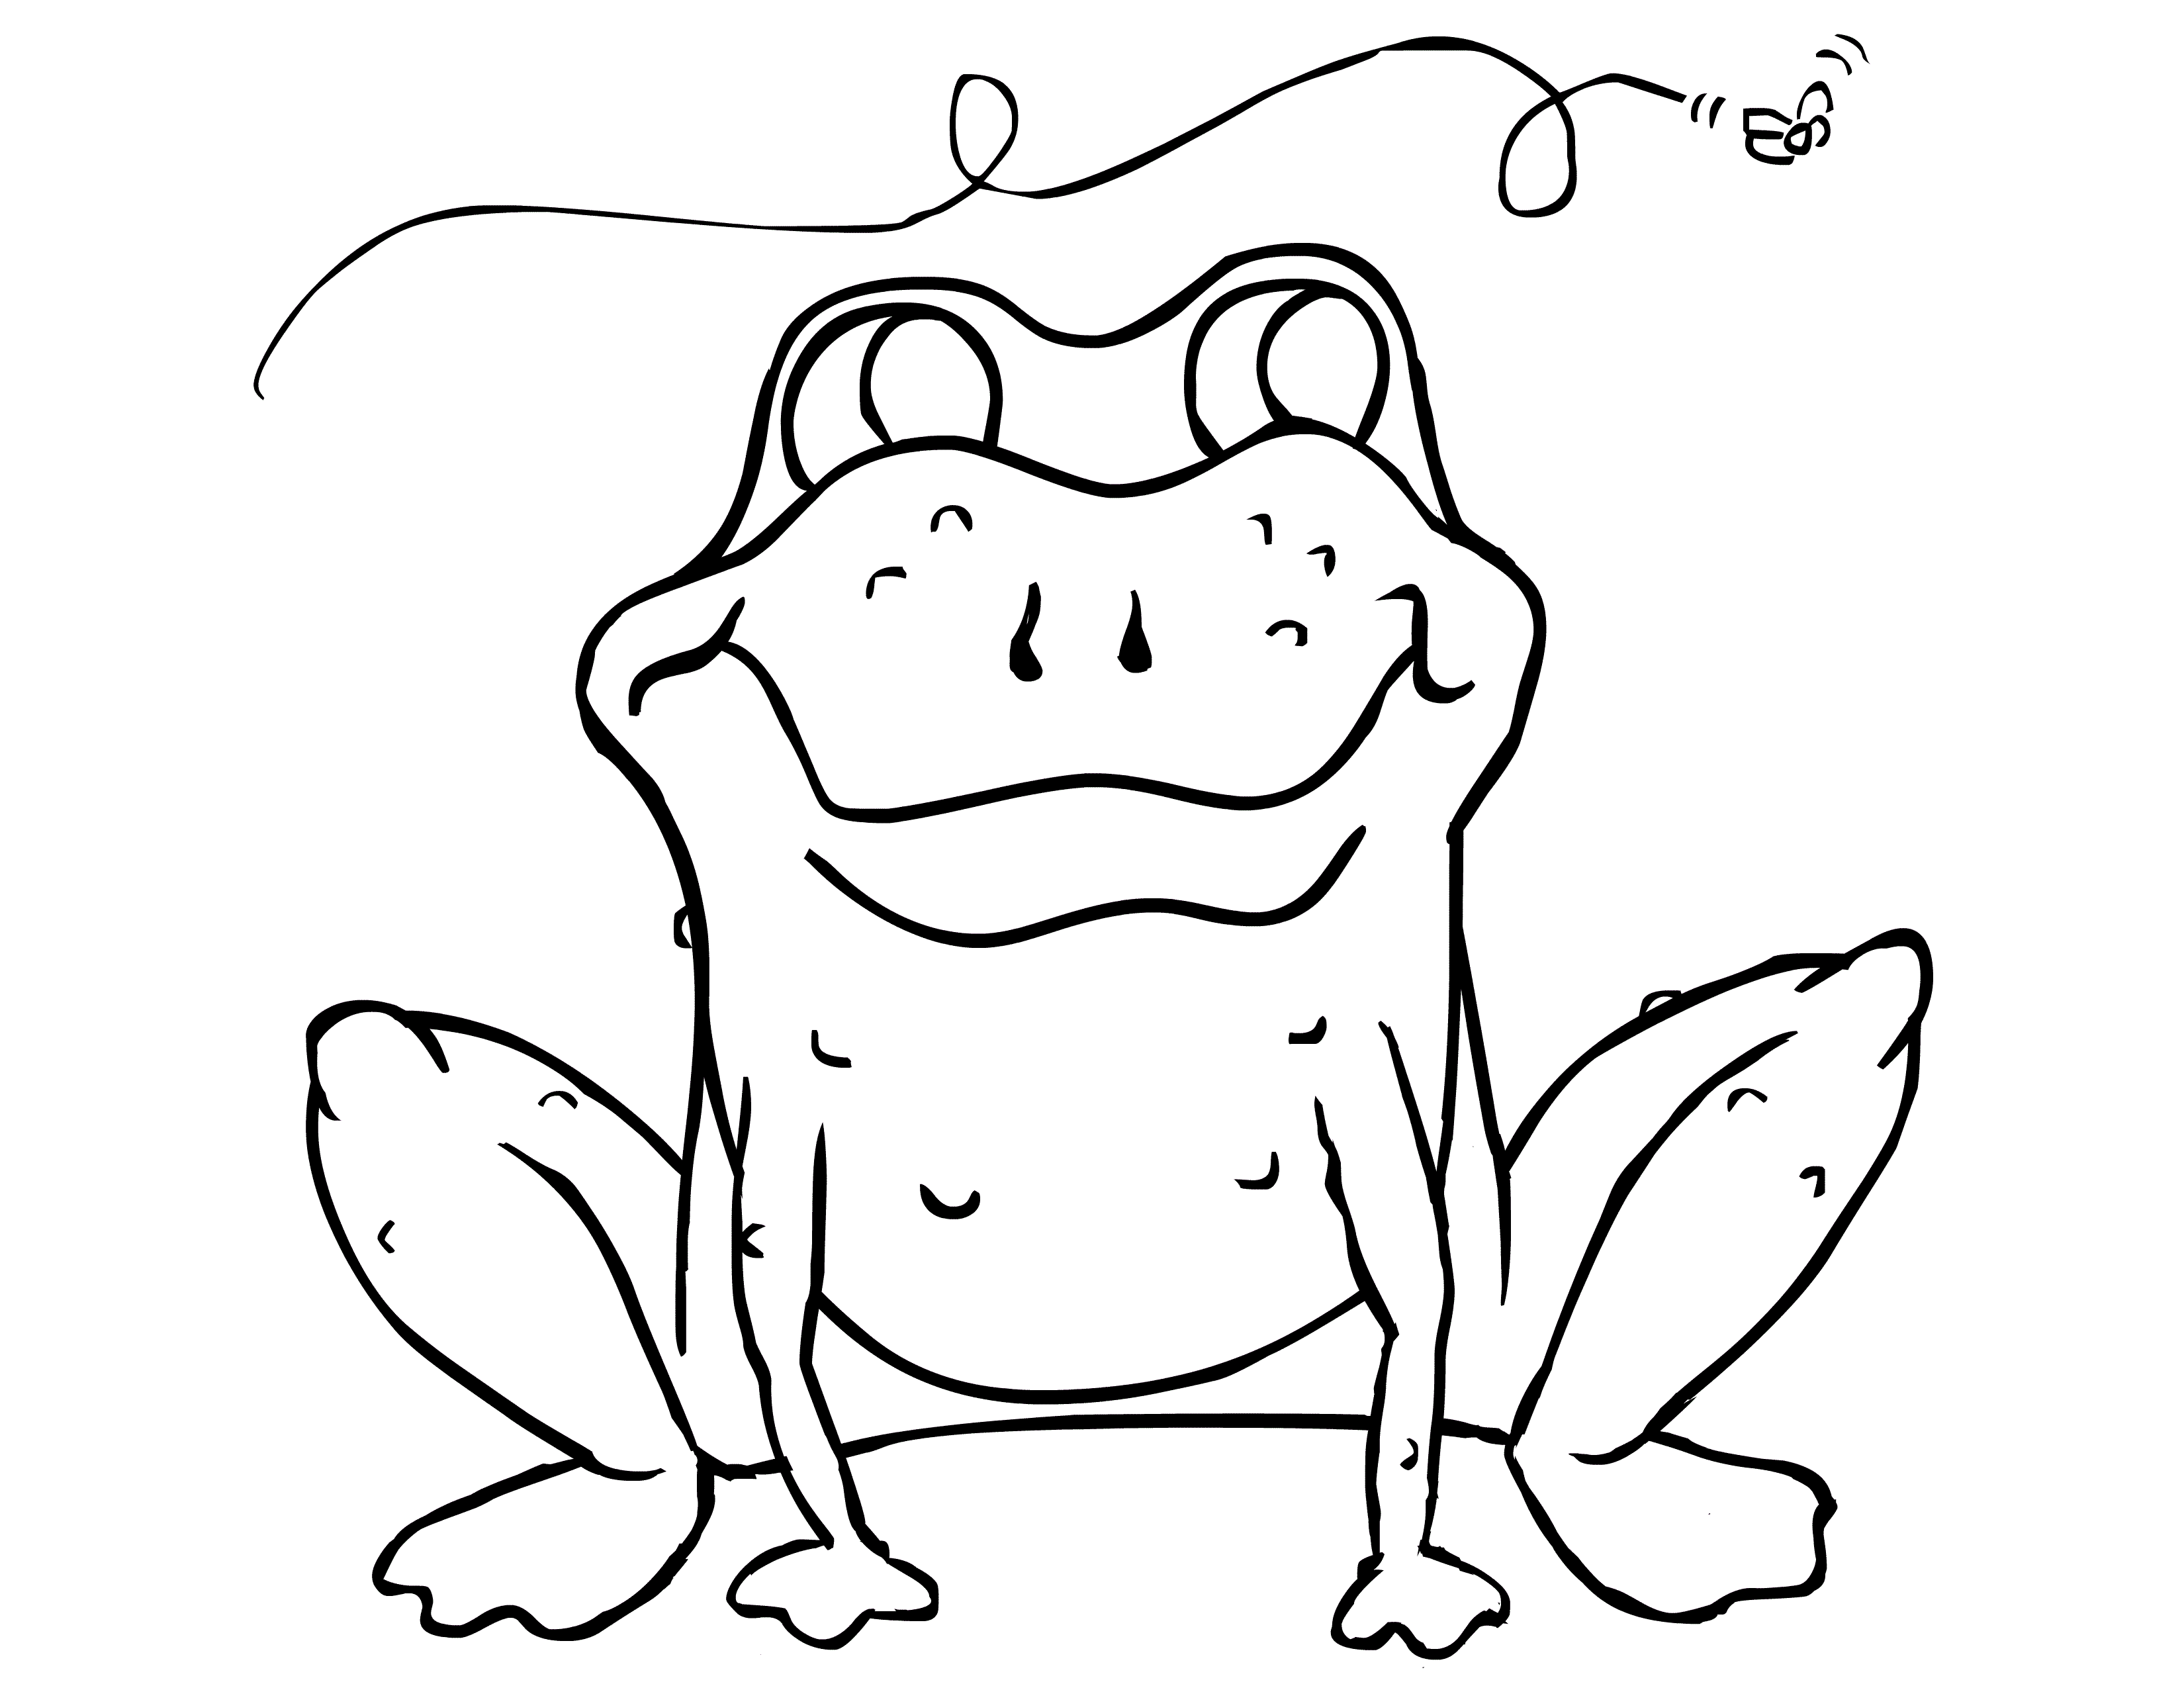 frogs coloring pages frog outline free download on clipartmag frogs coloring pages 